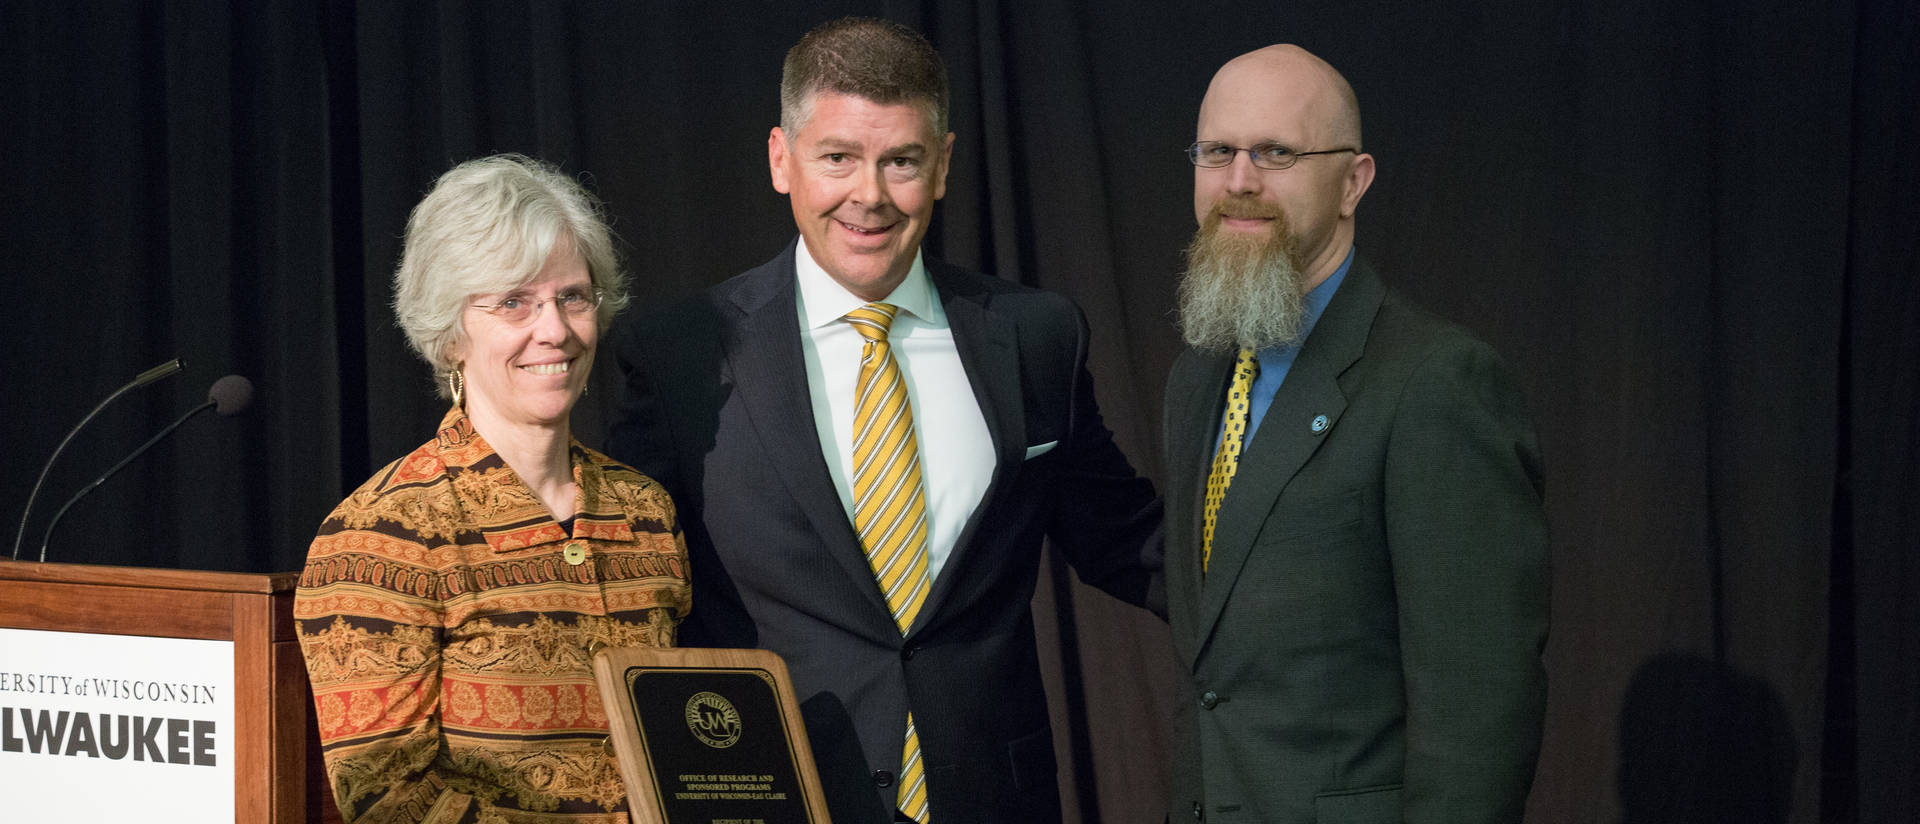 UW-Eau Claire's Karen Havholm, Assistant Vice Chancellor (left), and Director of Grants and Contracts, Jeremy Miner (right), with Regent Director Drew Peterson (middle)